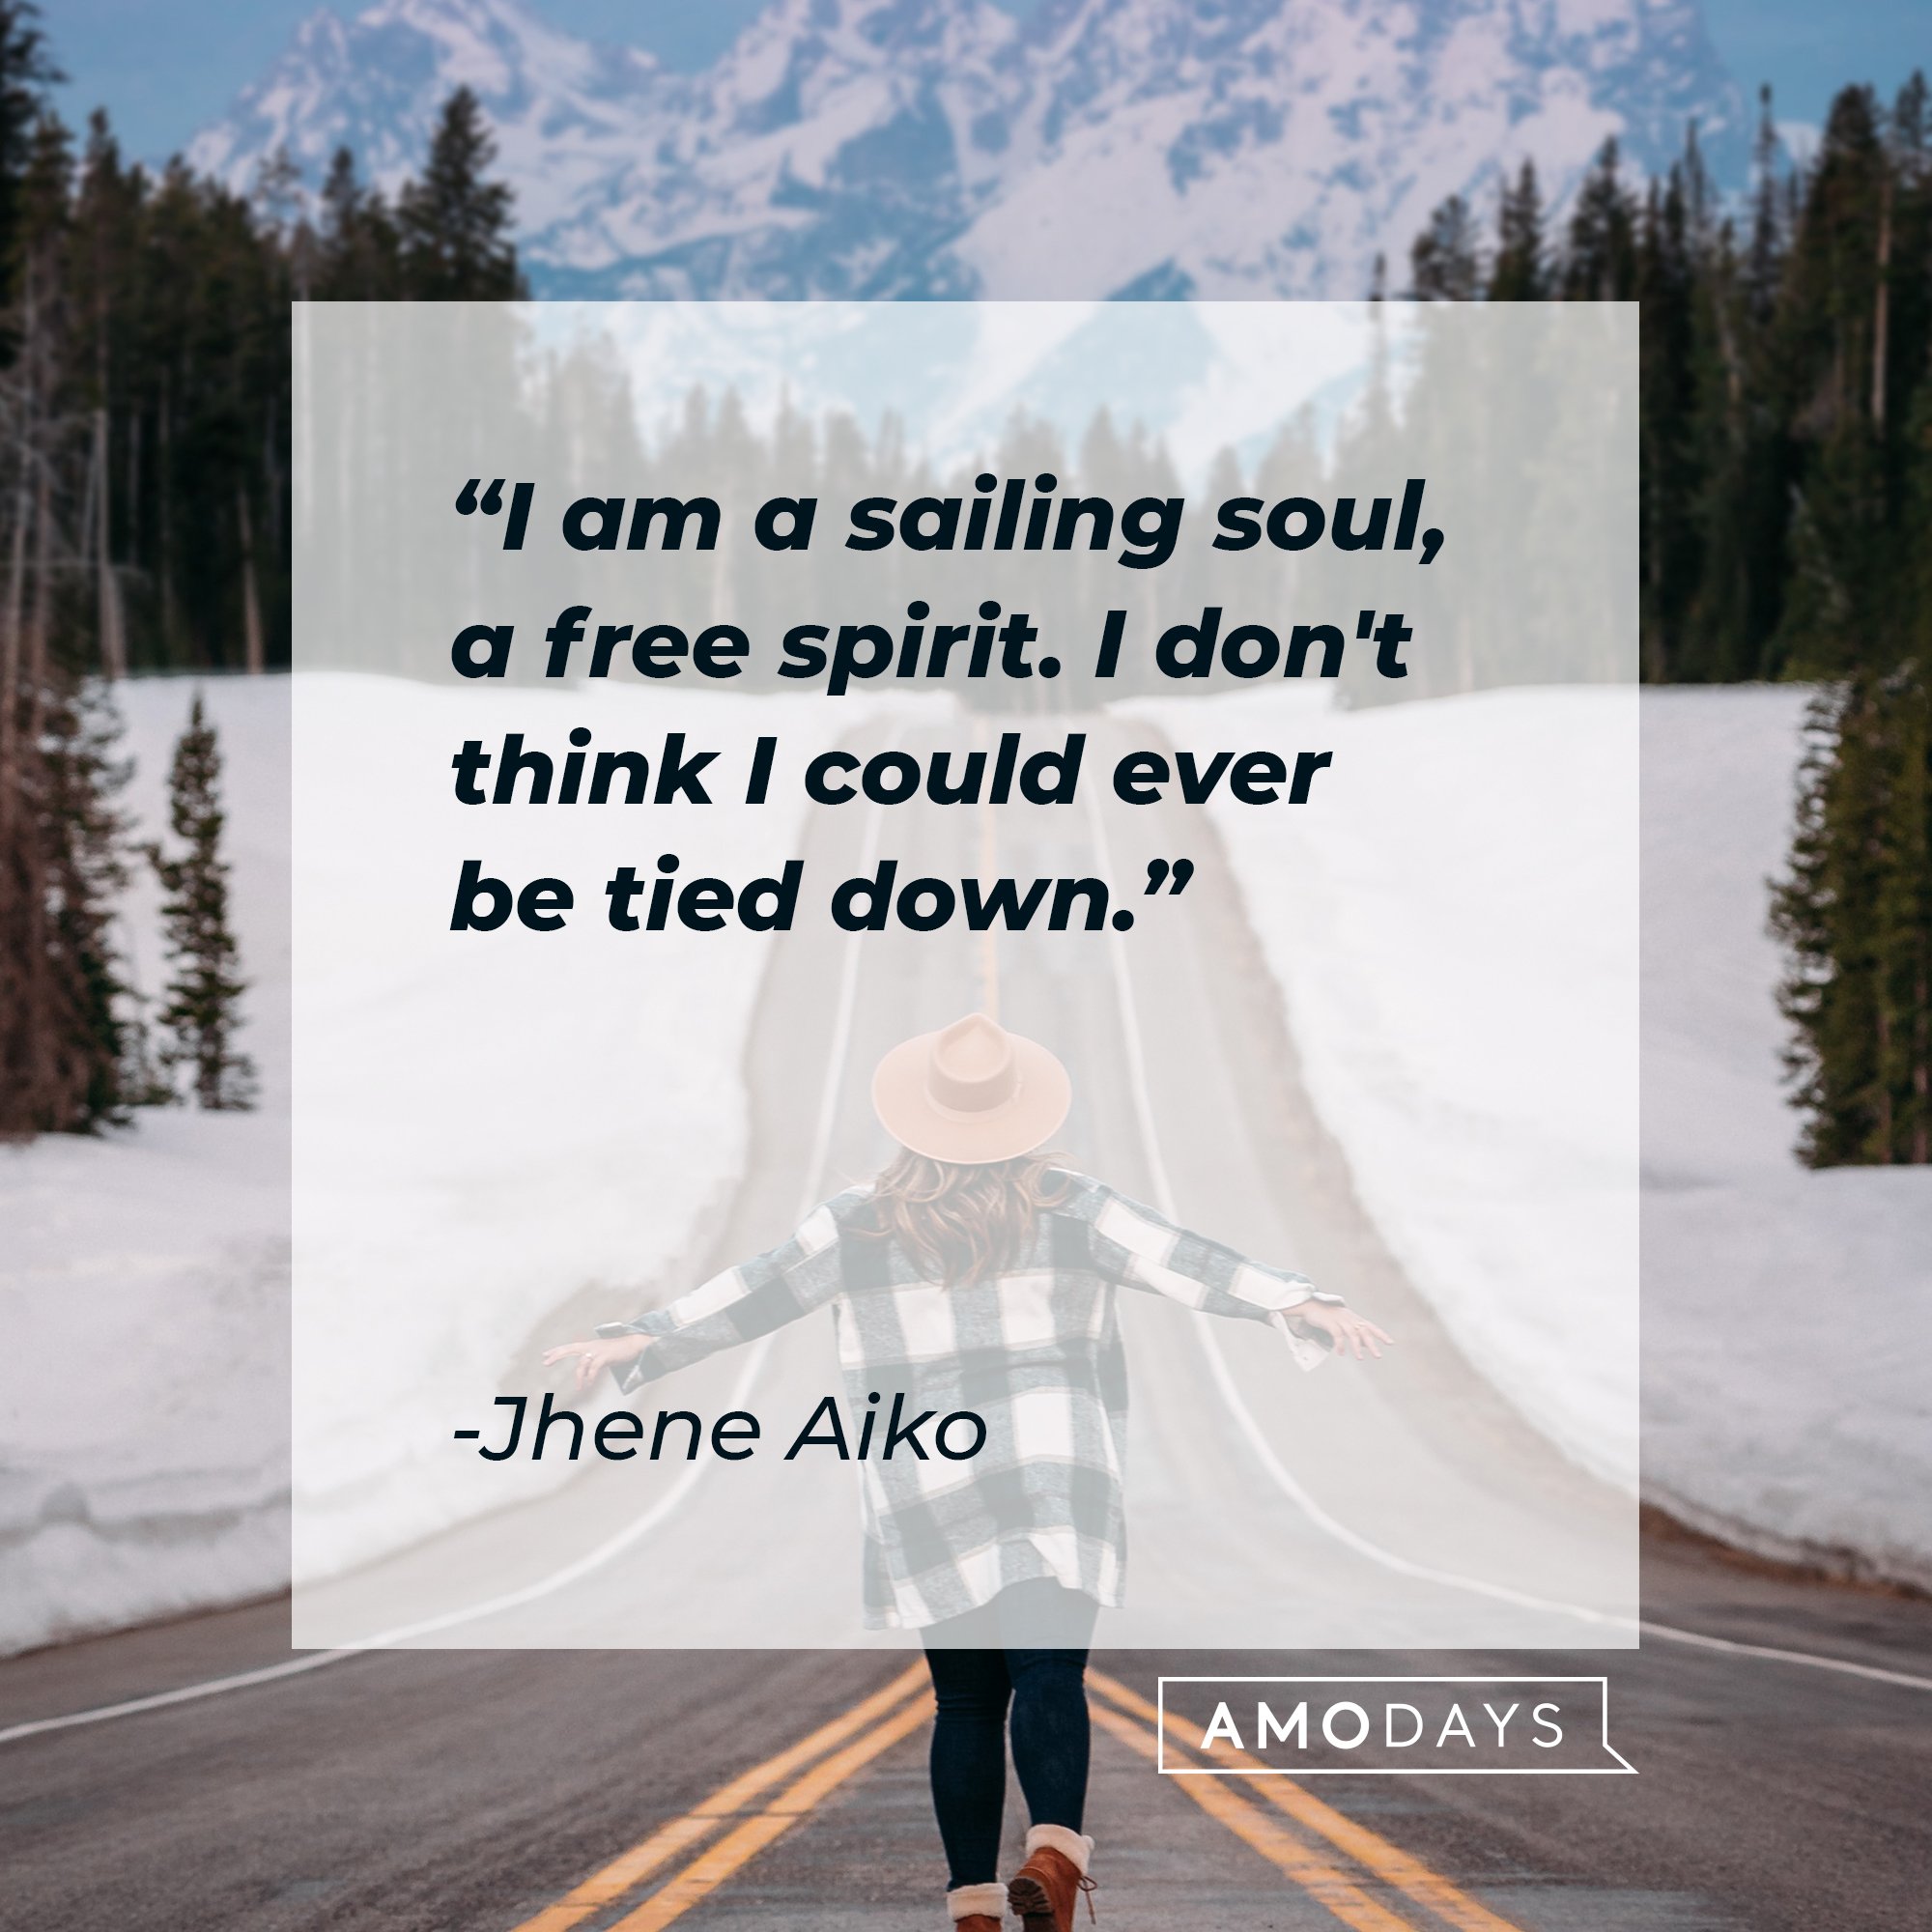  Jhene Aiko's quote:  "I am a sailing soul, a free spirit. I don't think I could ever be tied down." | Image: AmoDays